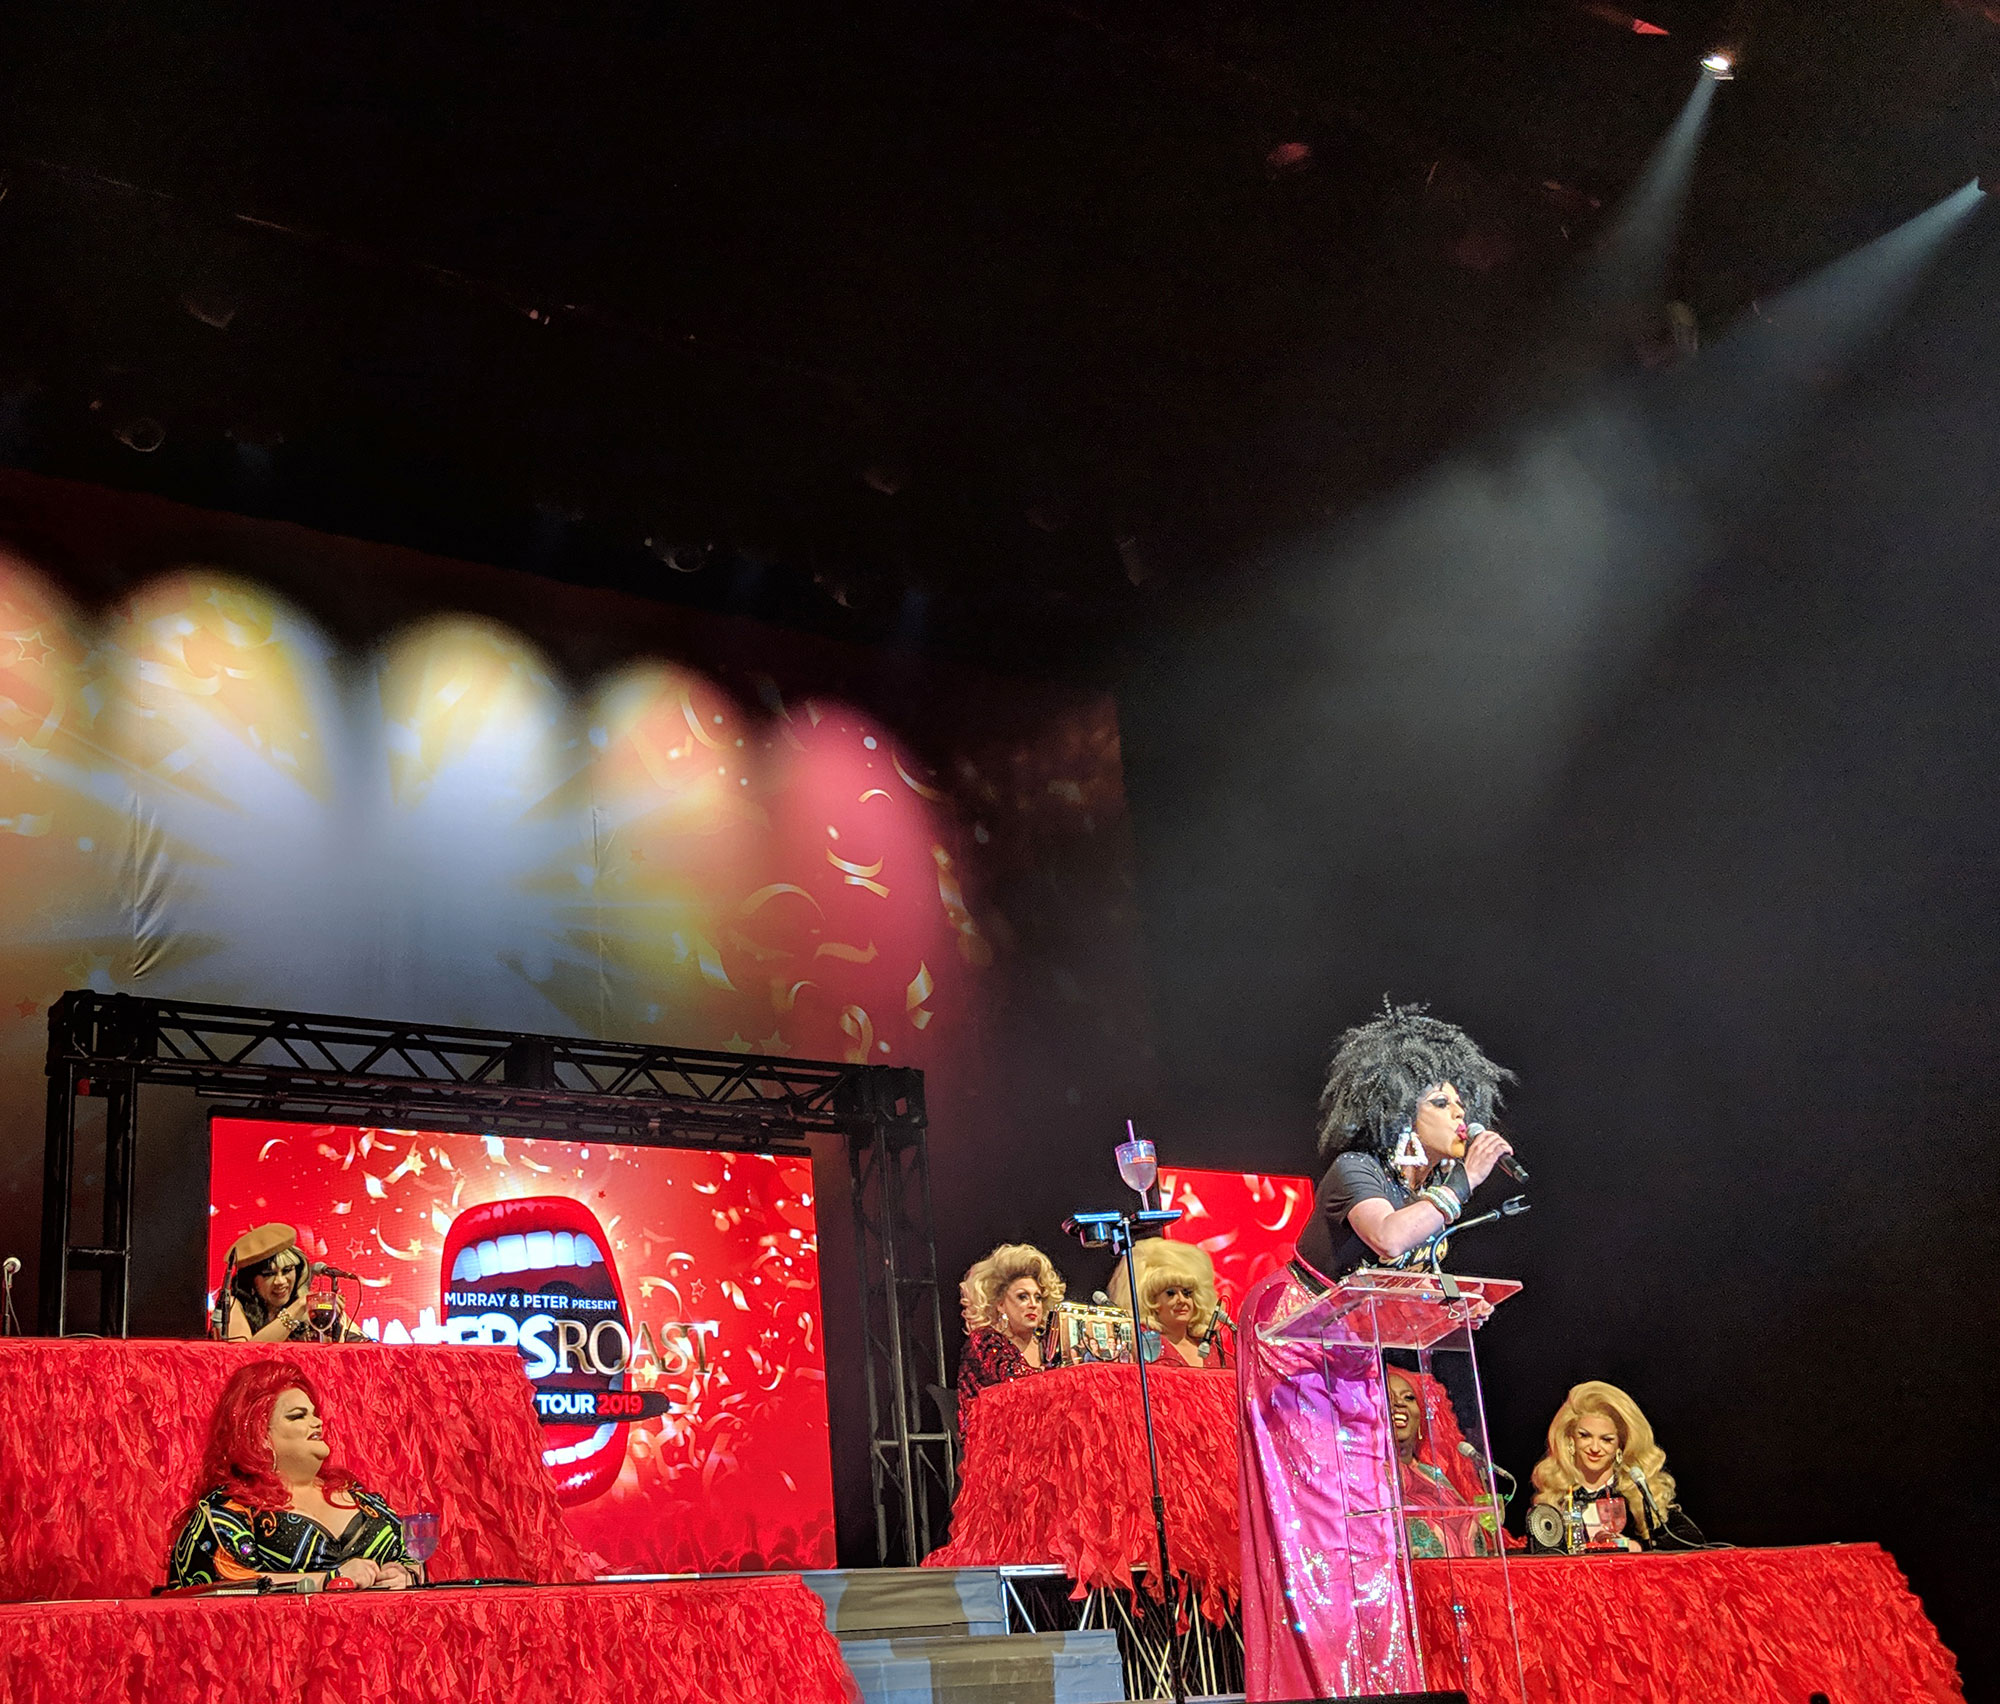 Thorgy Thor performing at the Warner Theatre in Washington D.C.